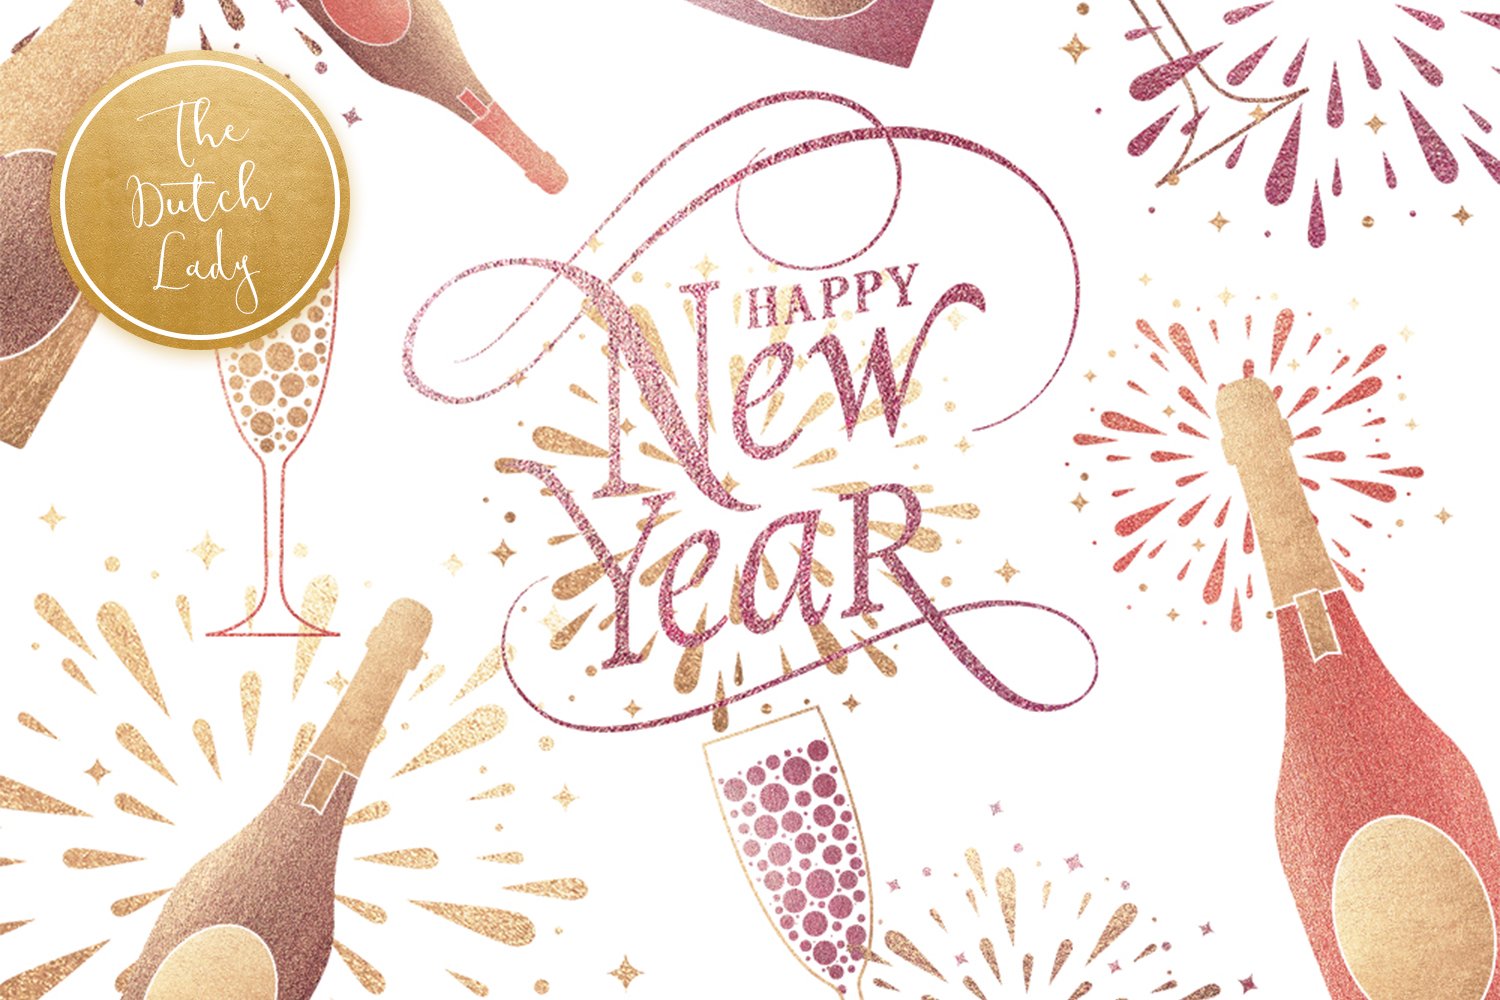 Happy New Year & Party Clipart Set cover image.